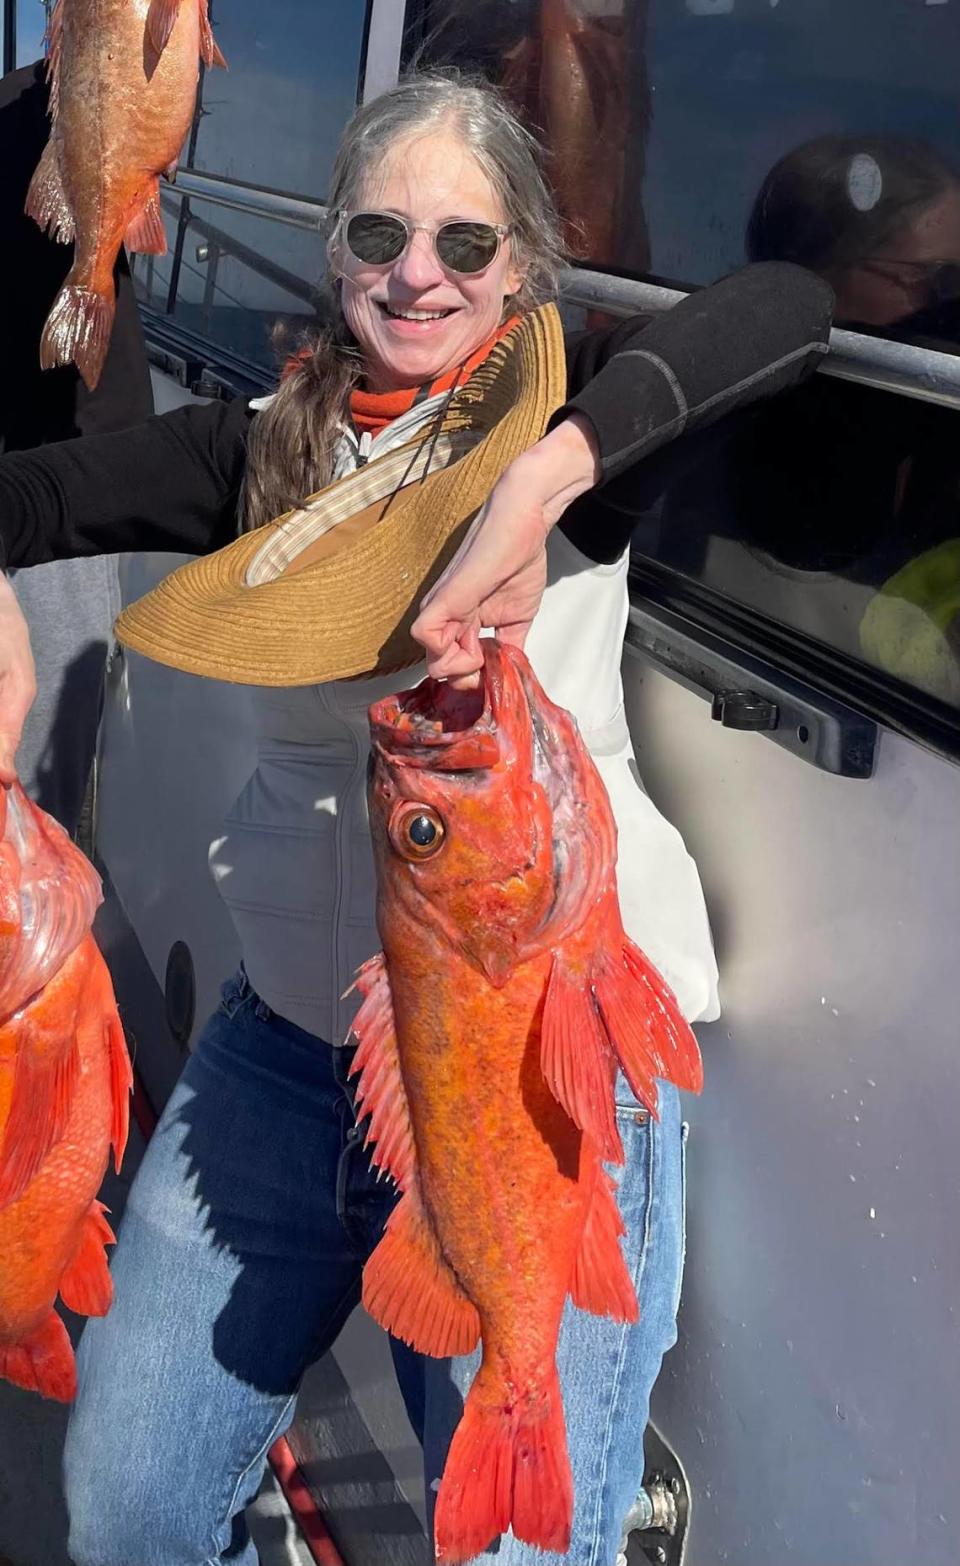 Johanna Kate Johnston, a Sacramento attorney who was on her bike and killed Jan. 17, started fishing so she could be close to her son. Teresa Zepeda